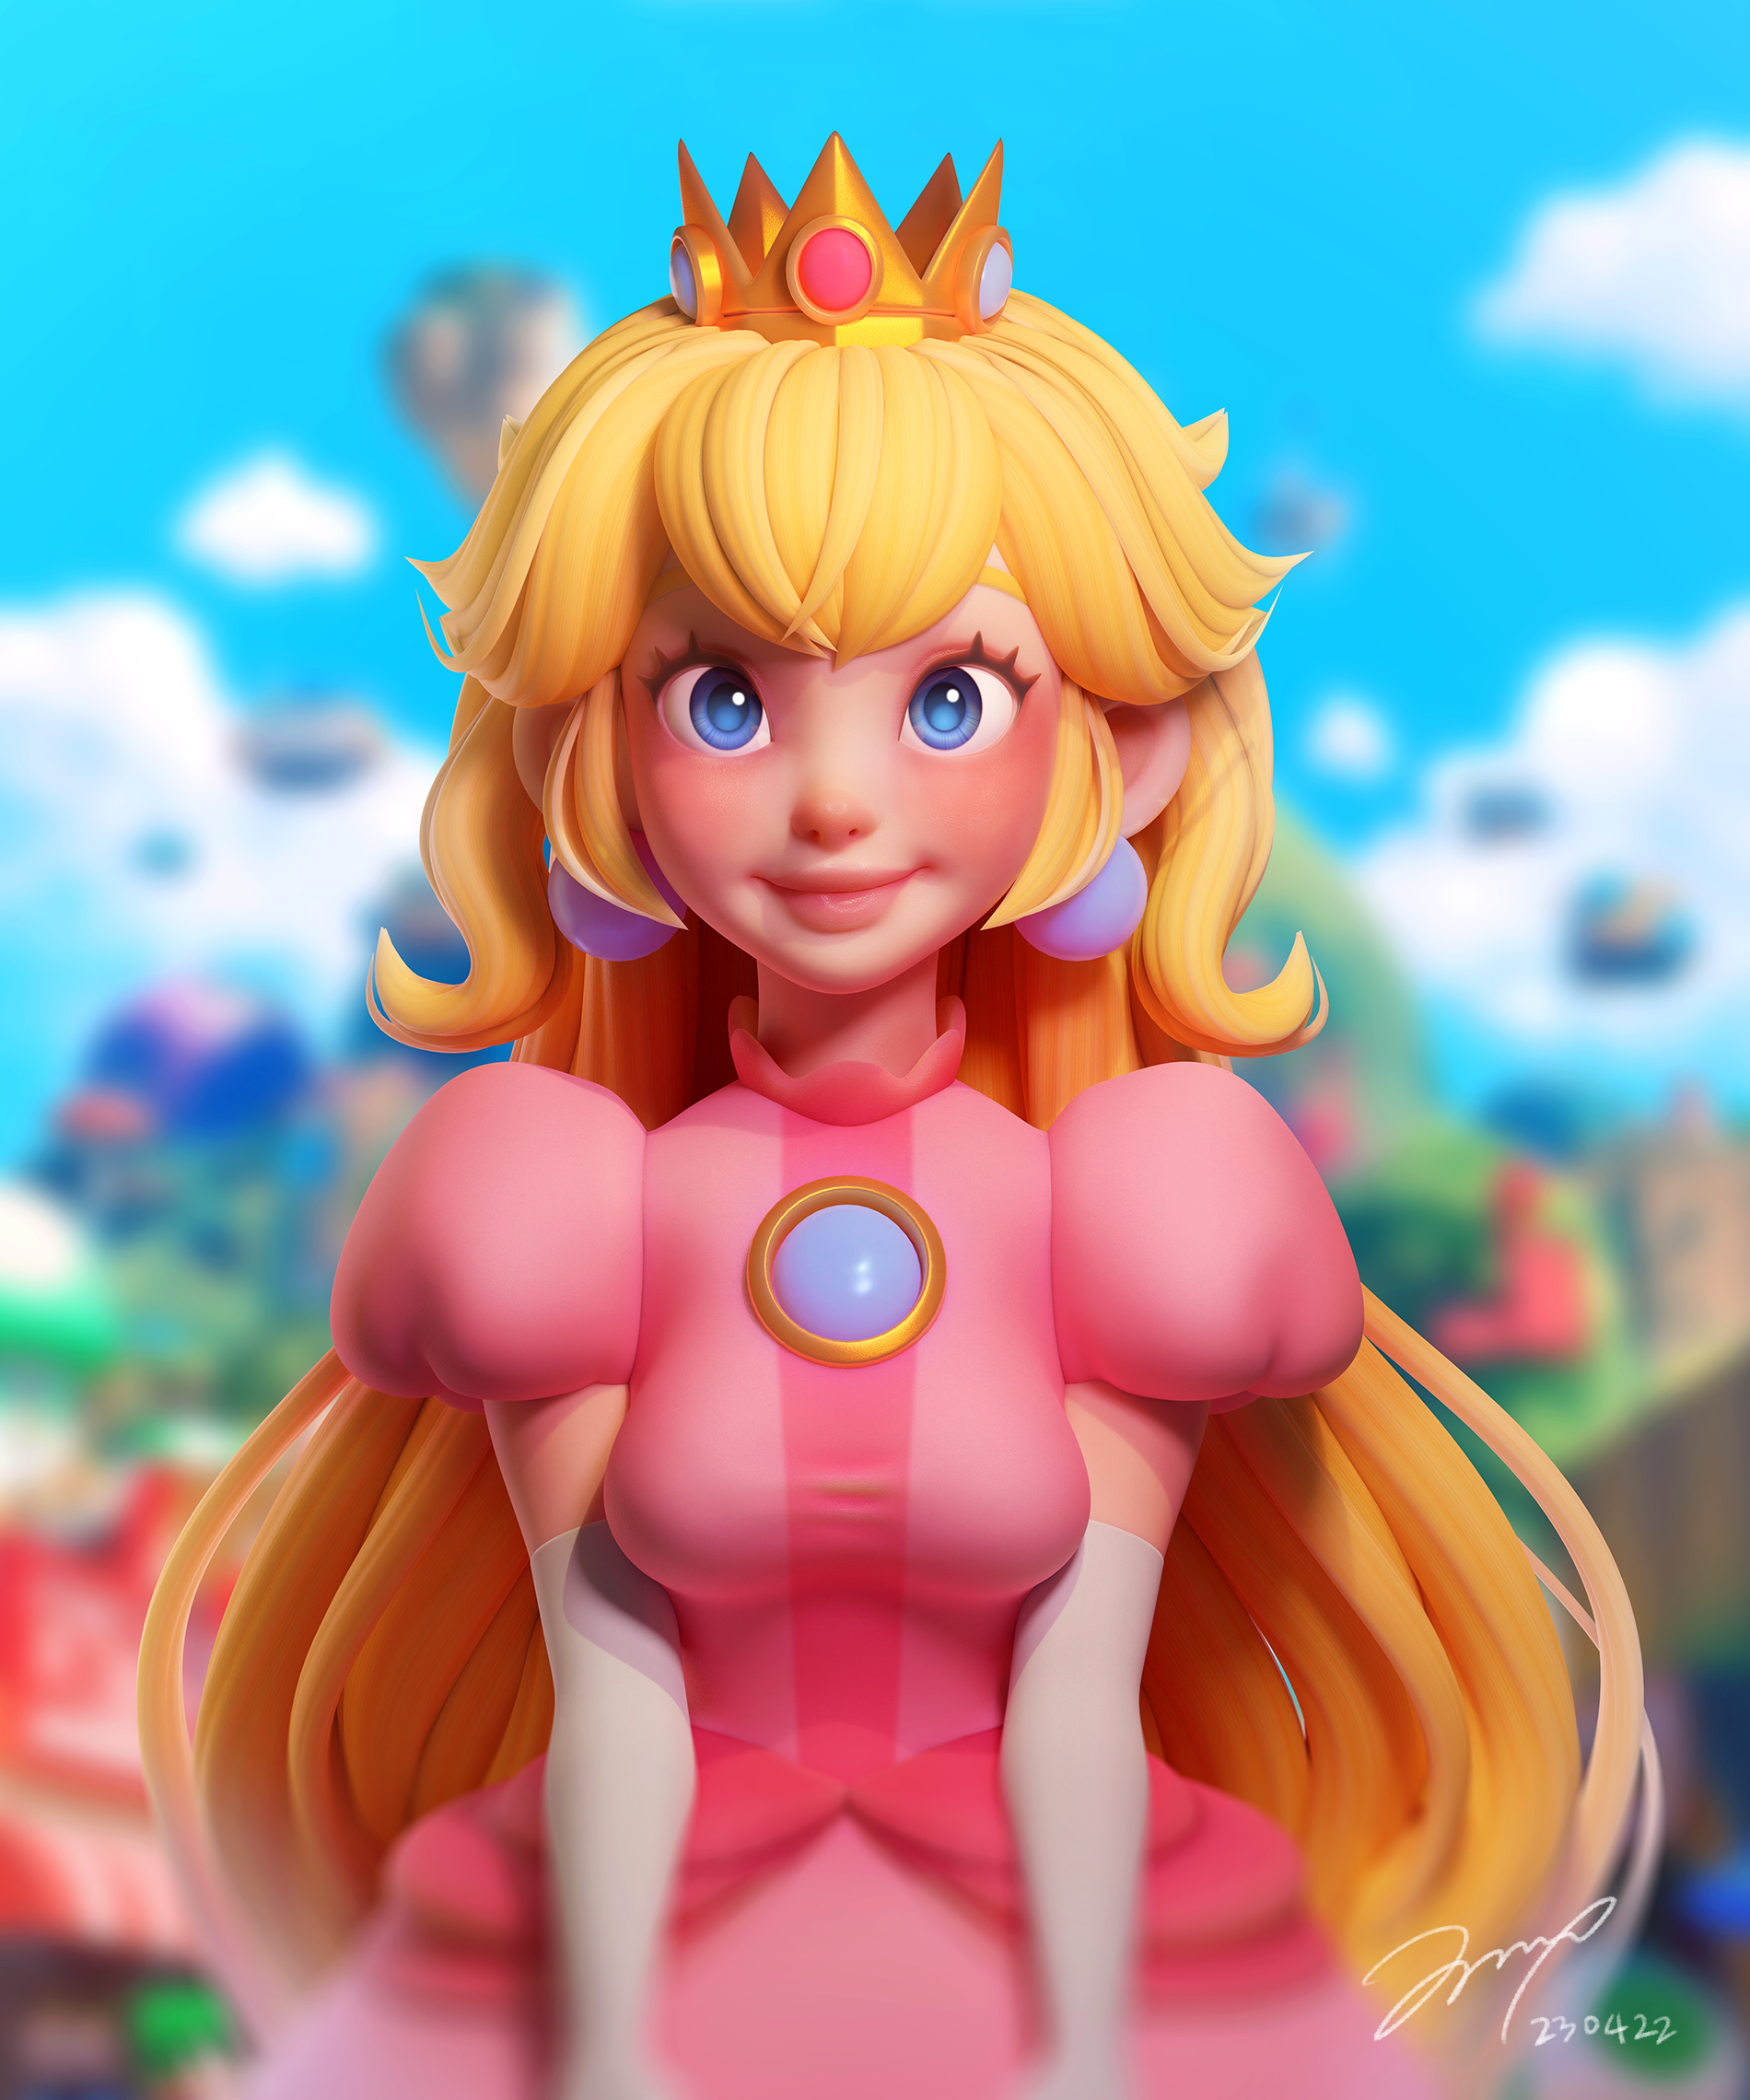 Princess Peach - Finished Projects - Blender Artists Community